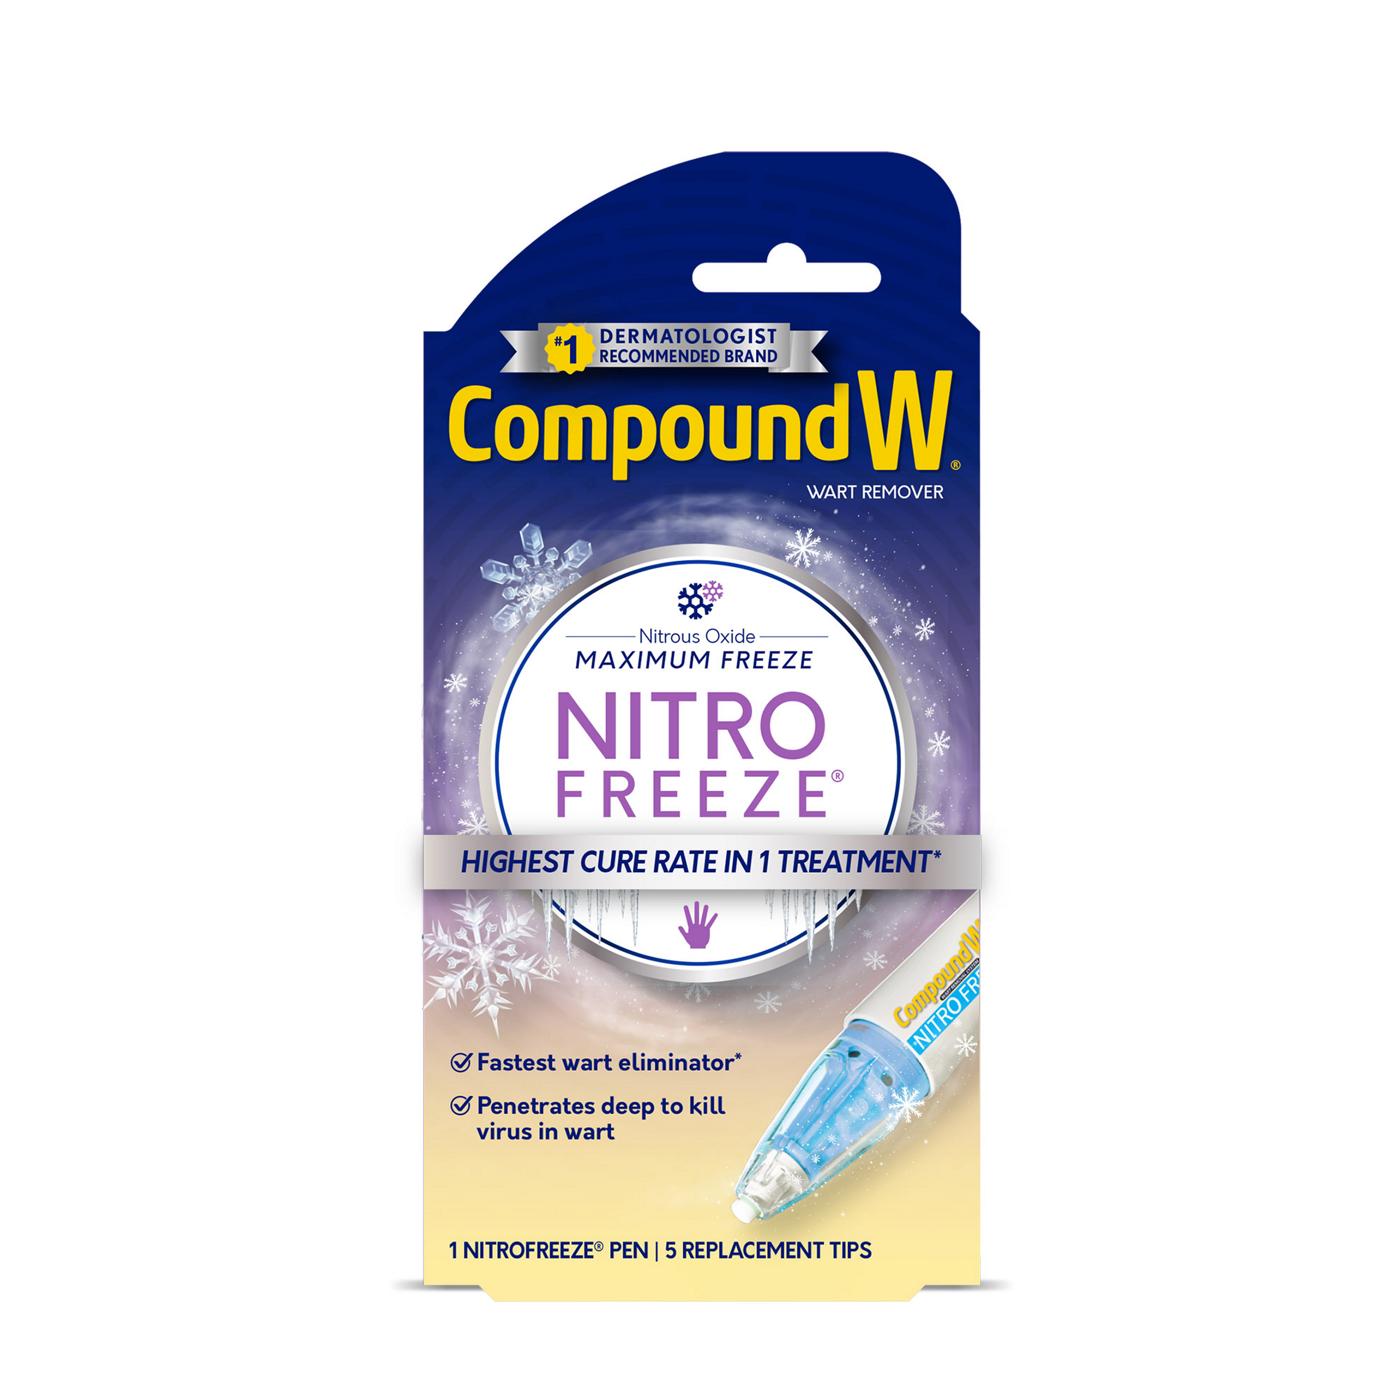 Compound W Nitro Freeze Wart Removal System; image 1 of 5